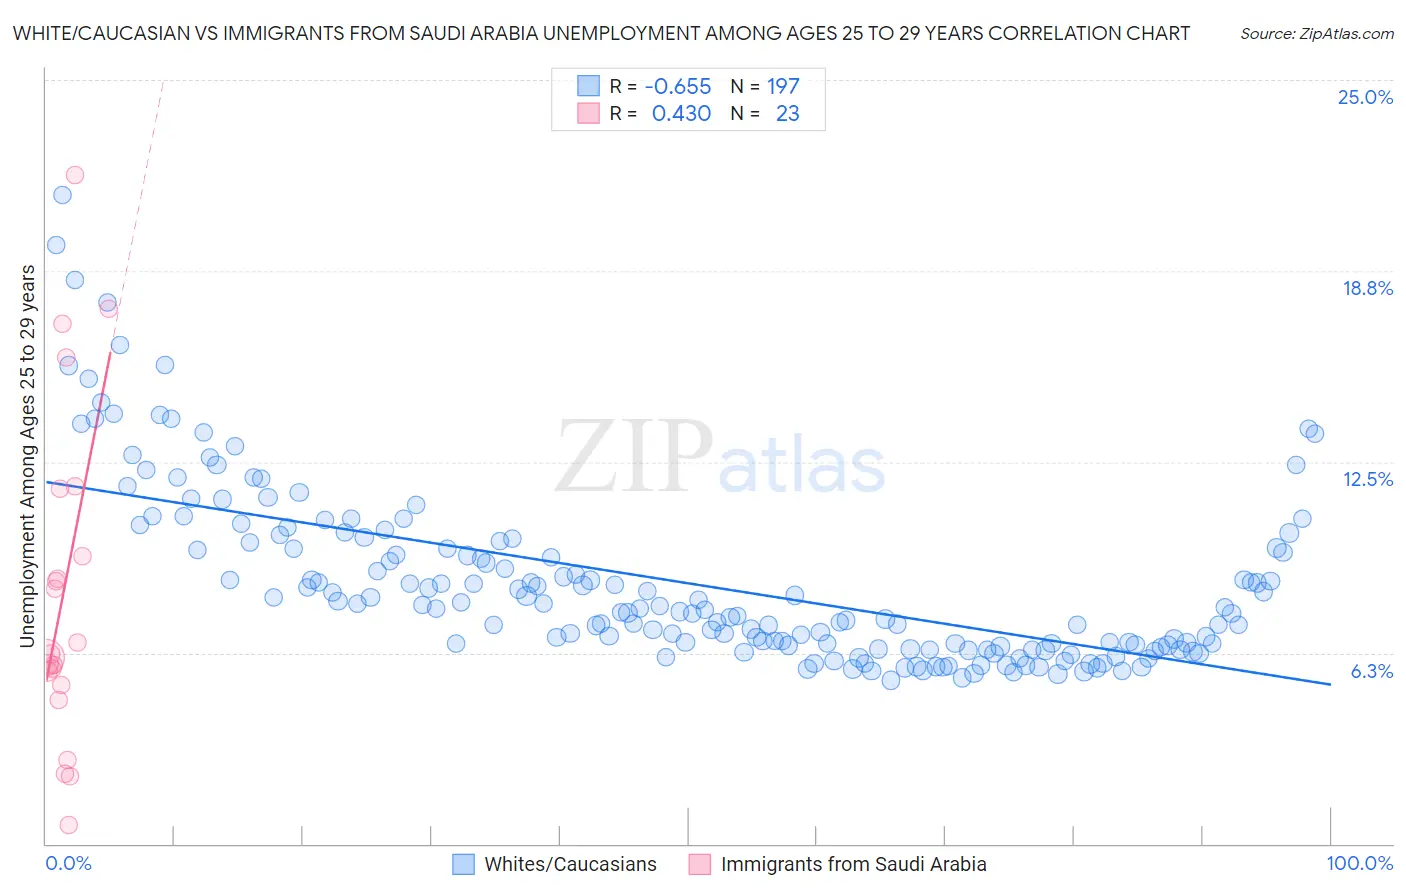 White/Caucasian vs Immigrants from Saudi Arabia Unemployment Among Ages 25 to 29 years